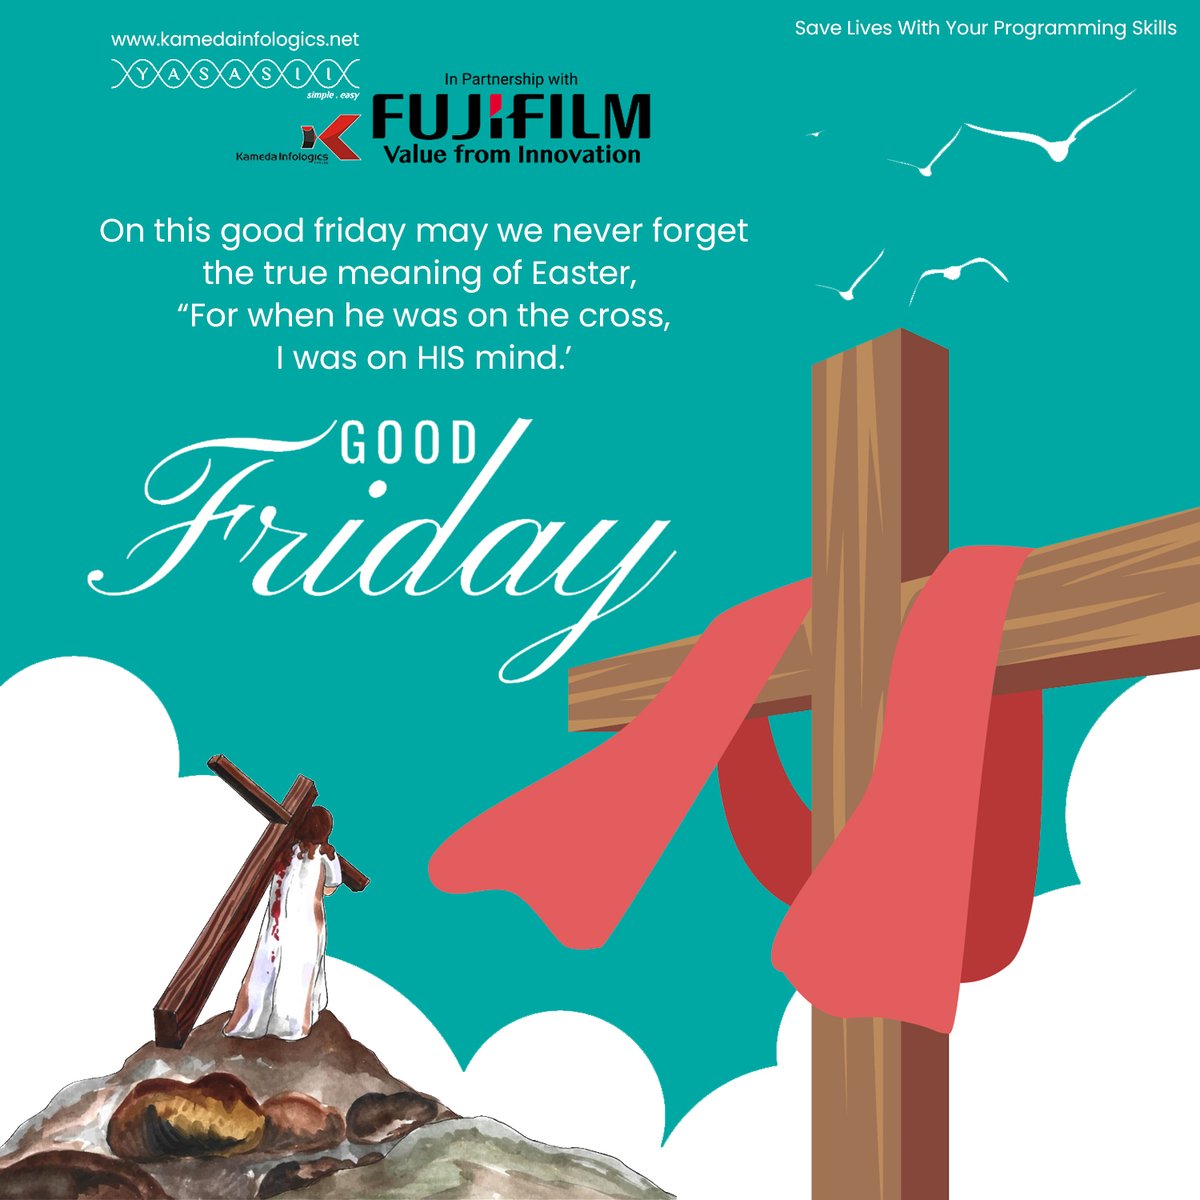 On this Good Friday, may we never forget the true meaning of Easter. 'For when He was on the cross, I was on His mind.'#GoodFriday #EasterWeekend #HolyWeek #Resurrection #Faith #Prayer #Redemption #Reflection #Spirituality